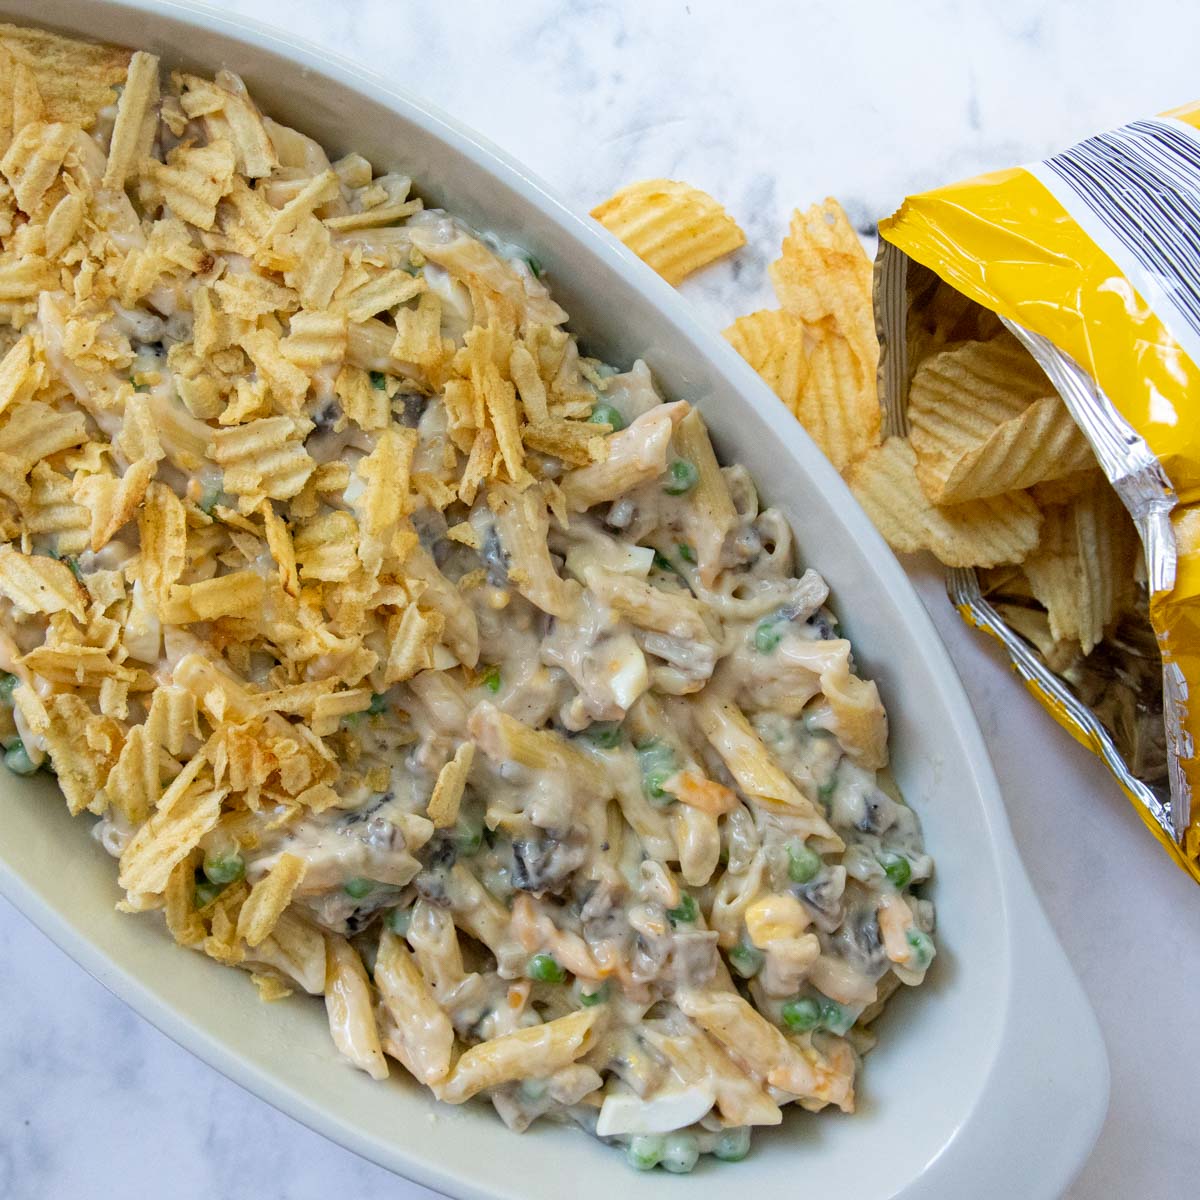 unbaked tuna casserole with potato chips on top and next to it